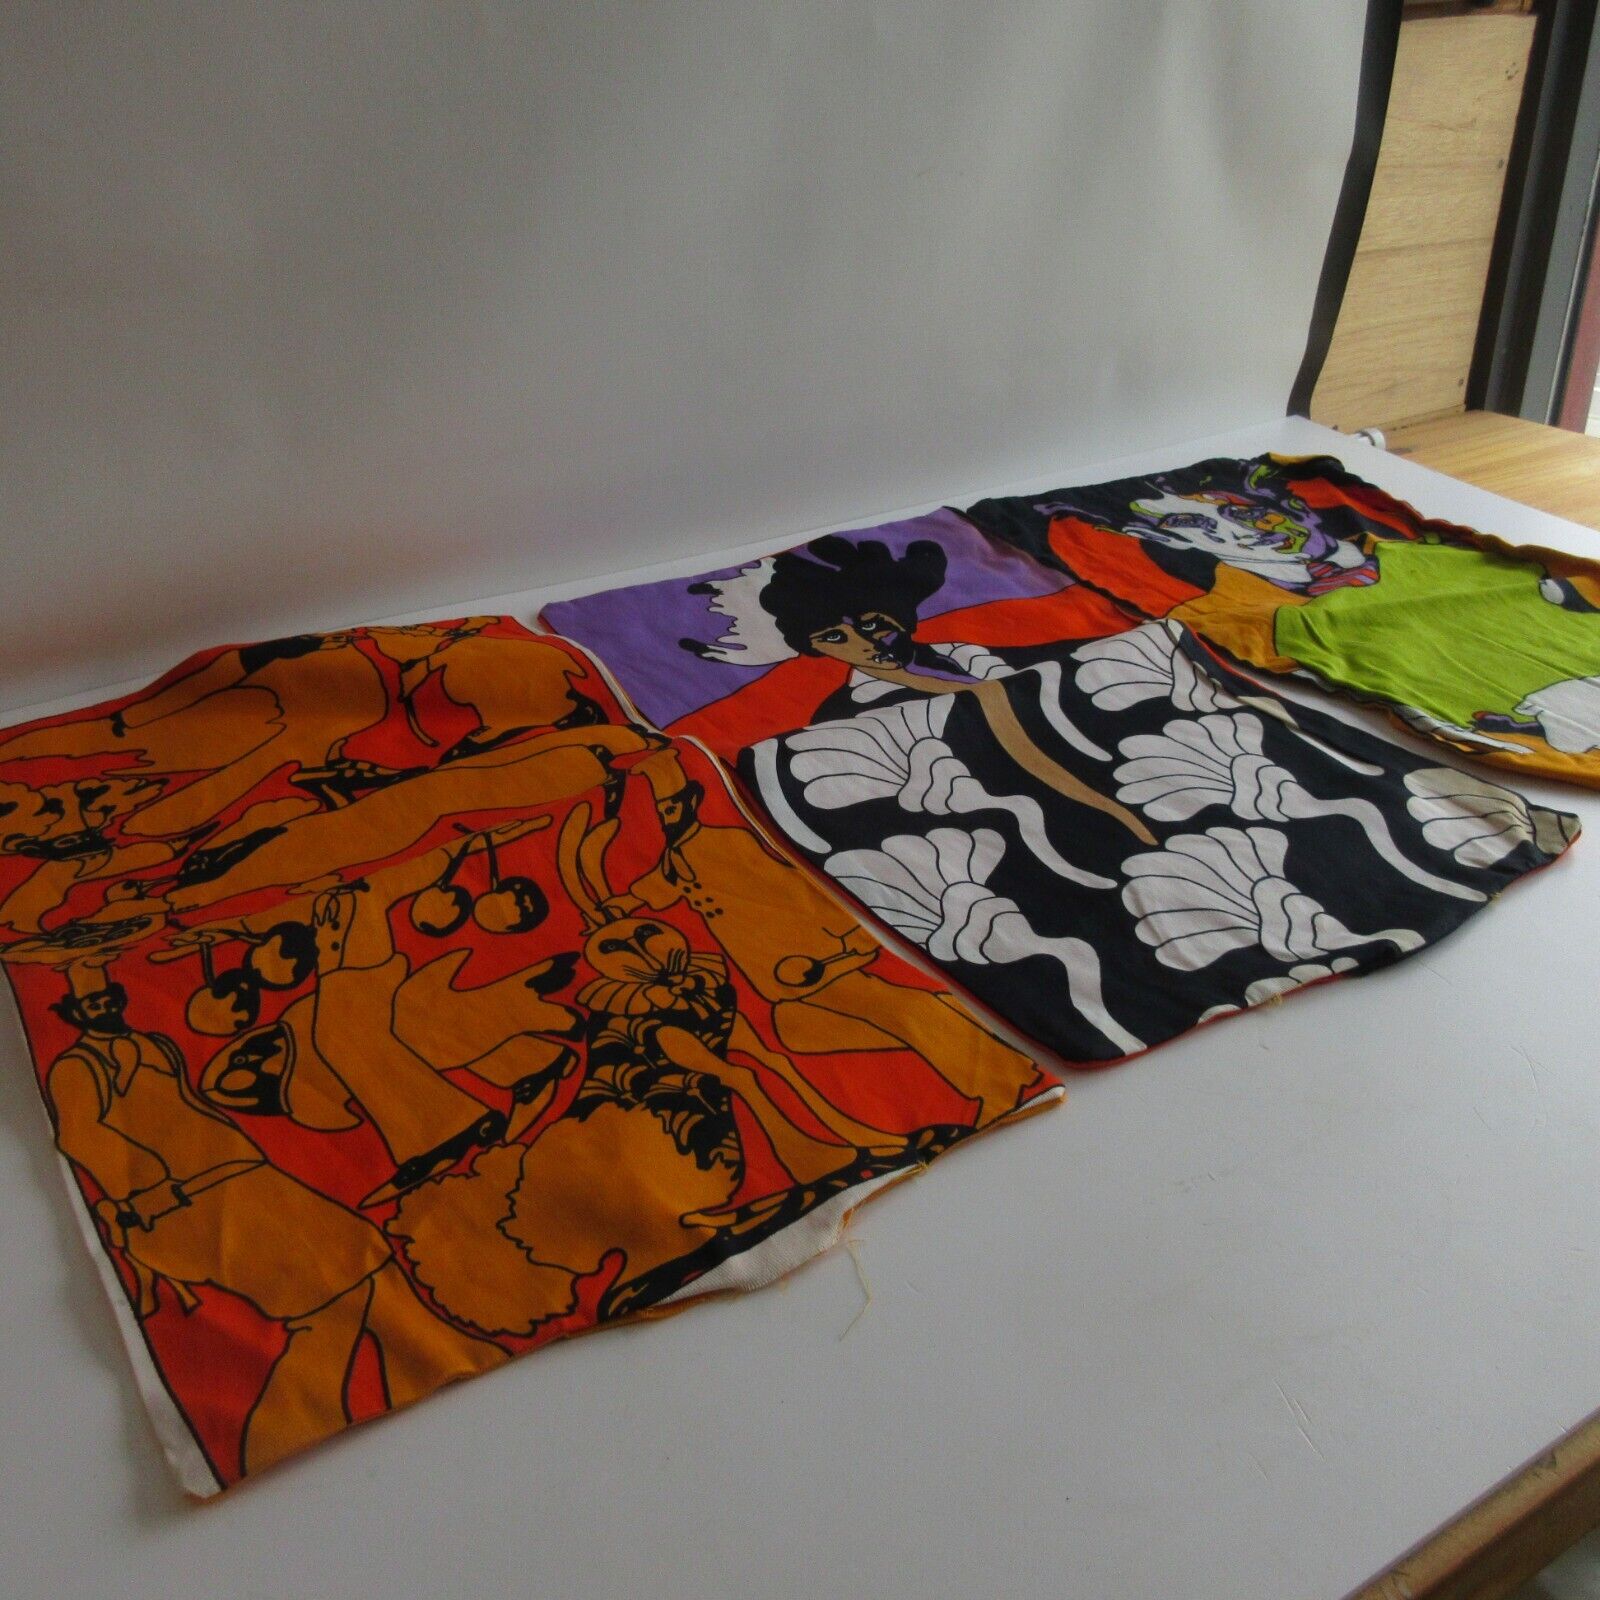 3 Lot VTG UNICORN CREATION  1970s Peter Max Style Pillow Shams Vampire and more